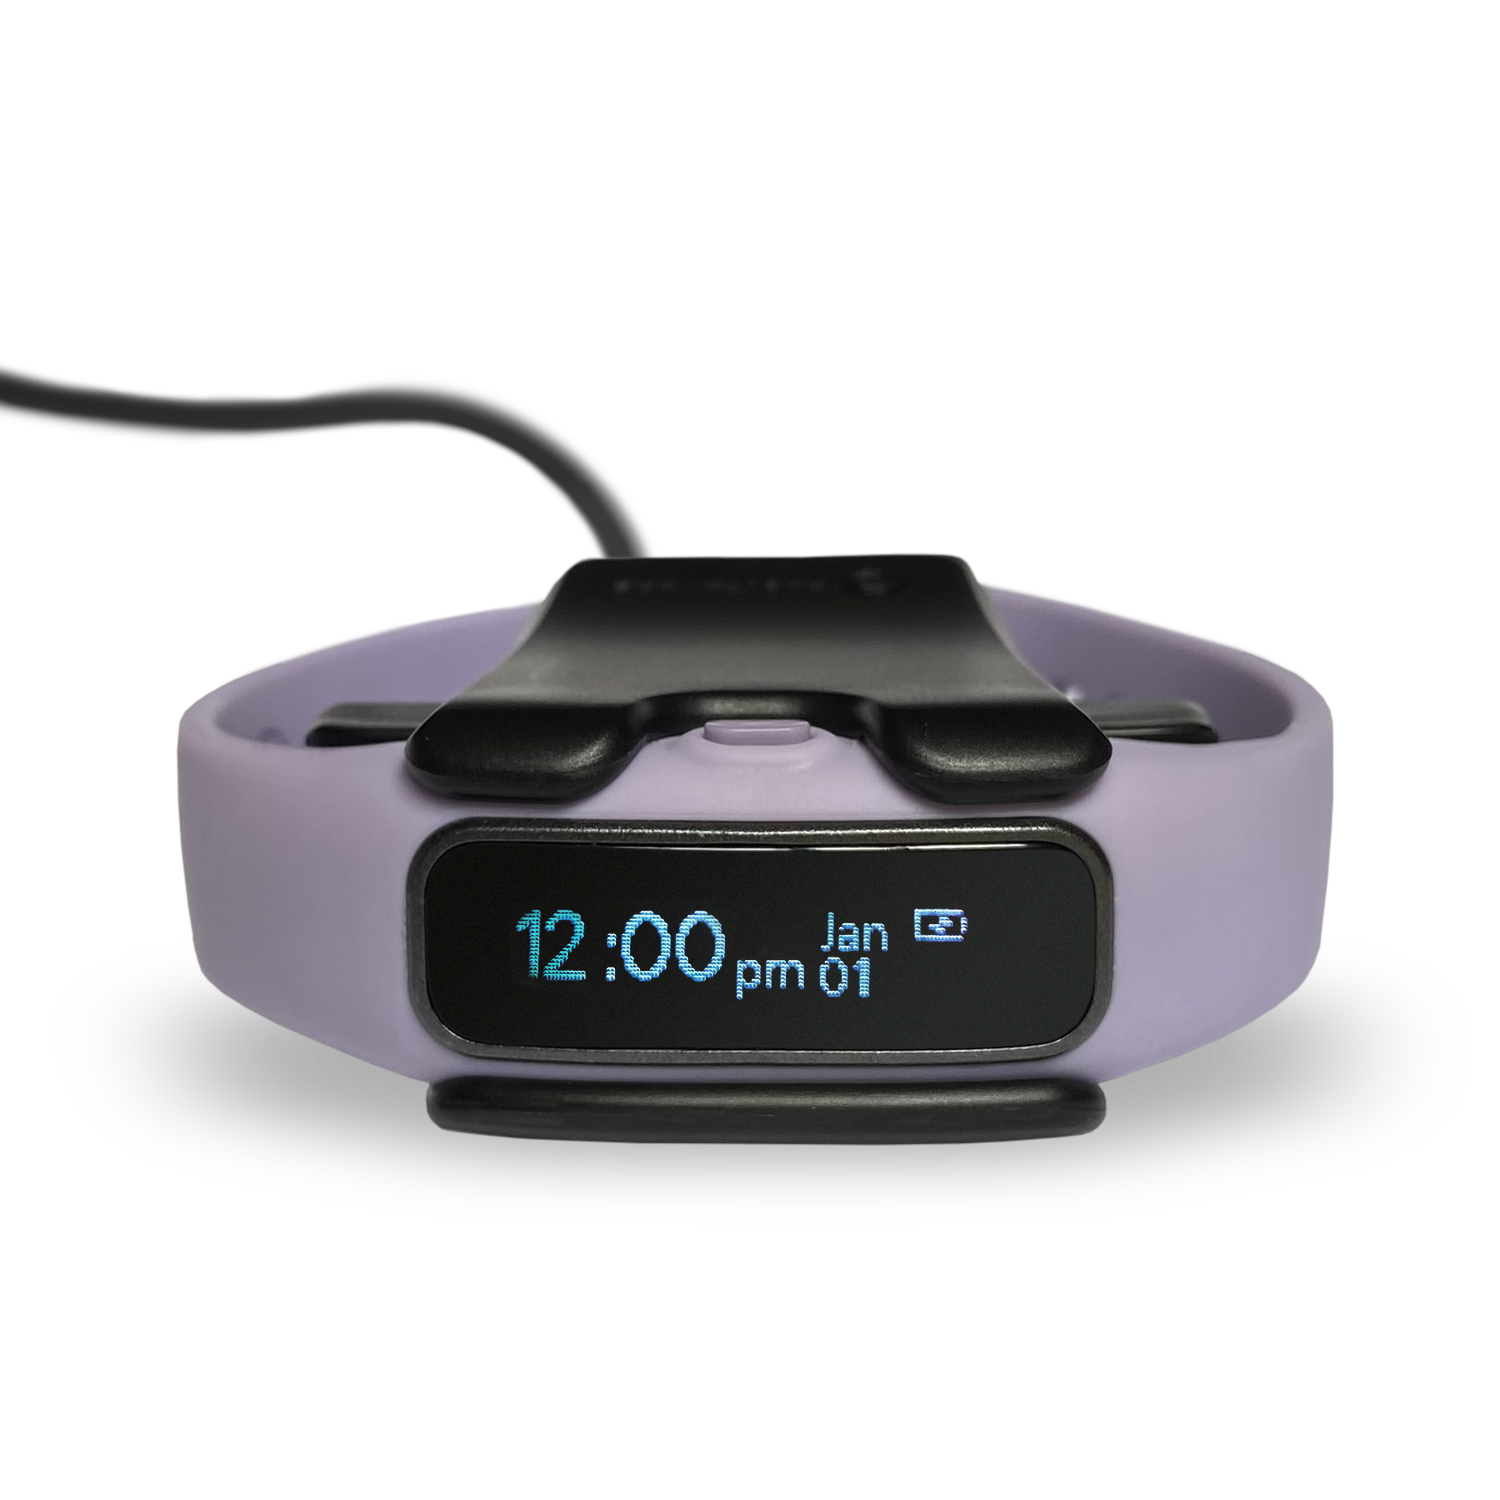 A purple Extra Charging Base: Keen2 with a clock on it.